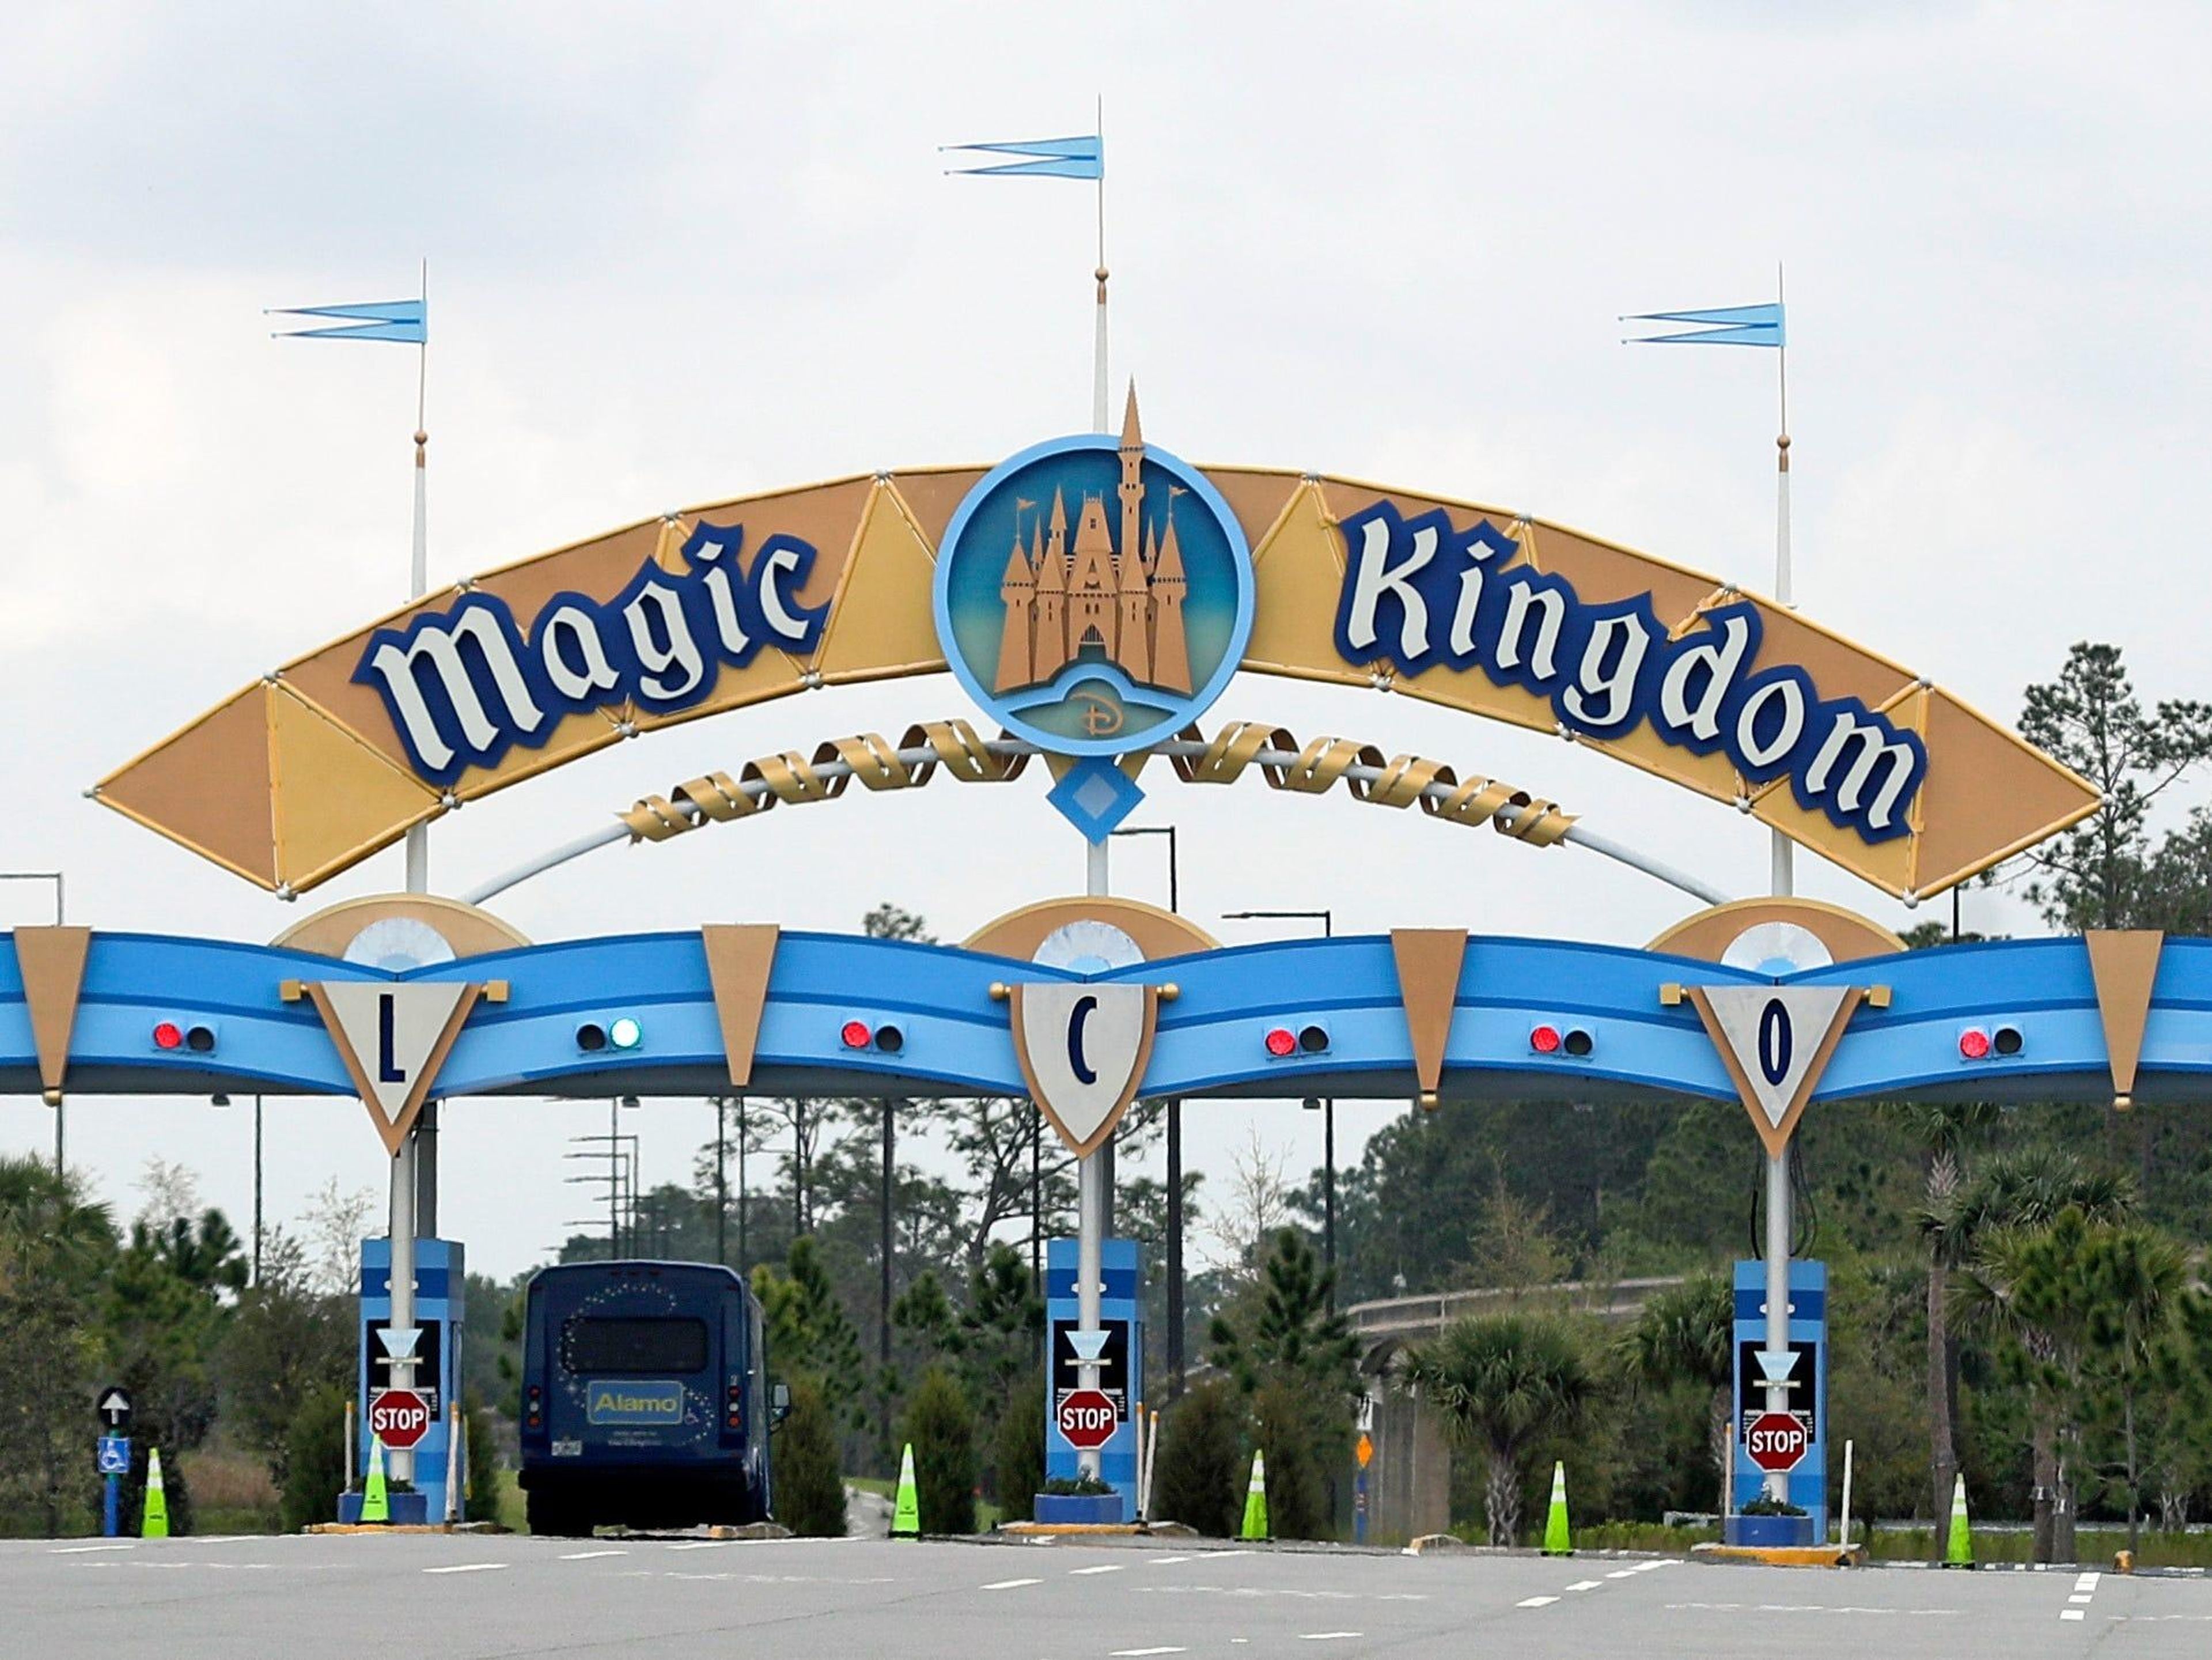 FILE - In this March 16, 2020, file photo, the entrance to the parking lot at the Magic Kingdom at Walt Disney World is closed in Lake Buena Vista, Fla. The Splash Mountain ride at Disney parks in California and Florida is being recast. Disney officials